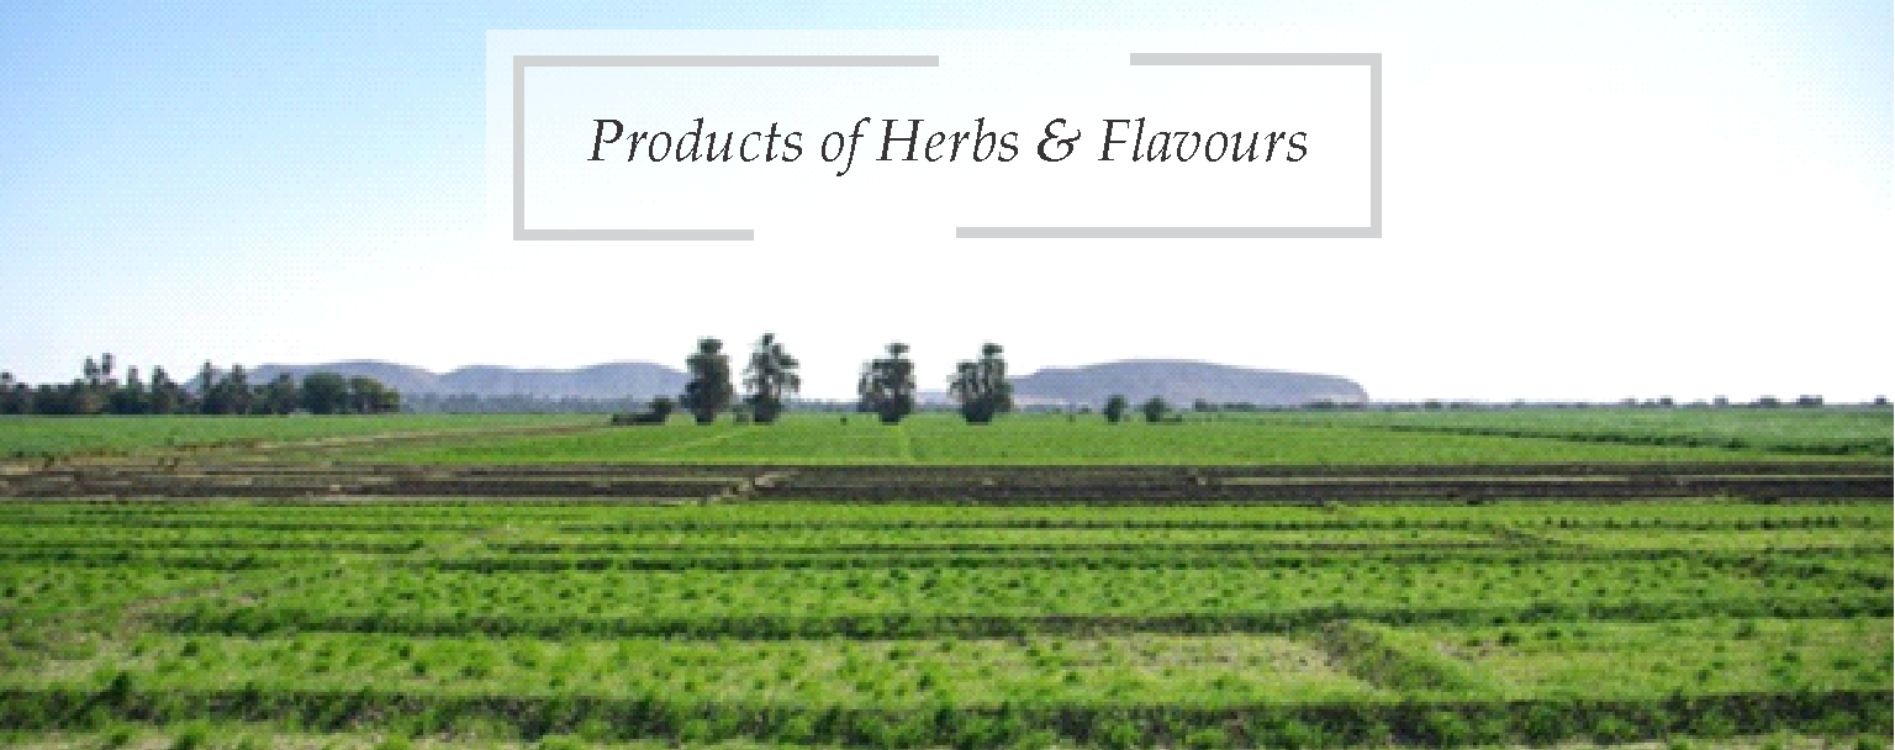 Products of Herbs & Flavours